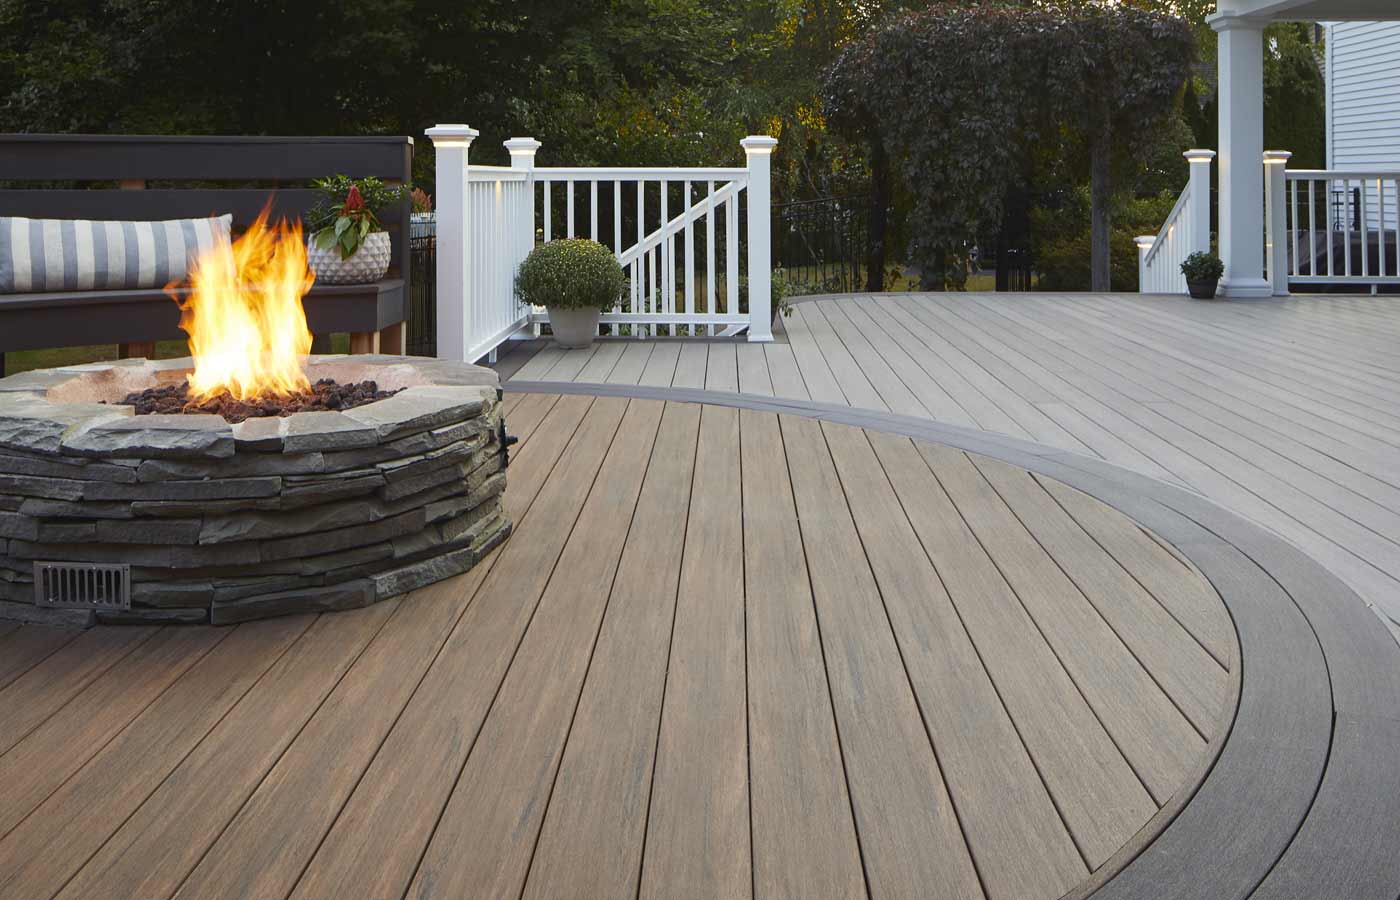 Azek Decking by TimberTech installed in a deck with a bonfire.